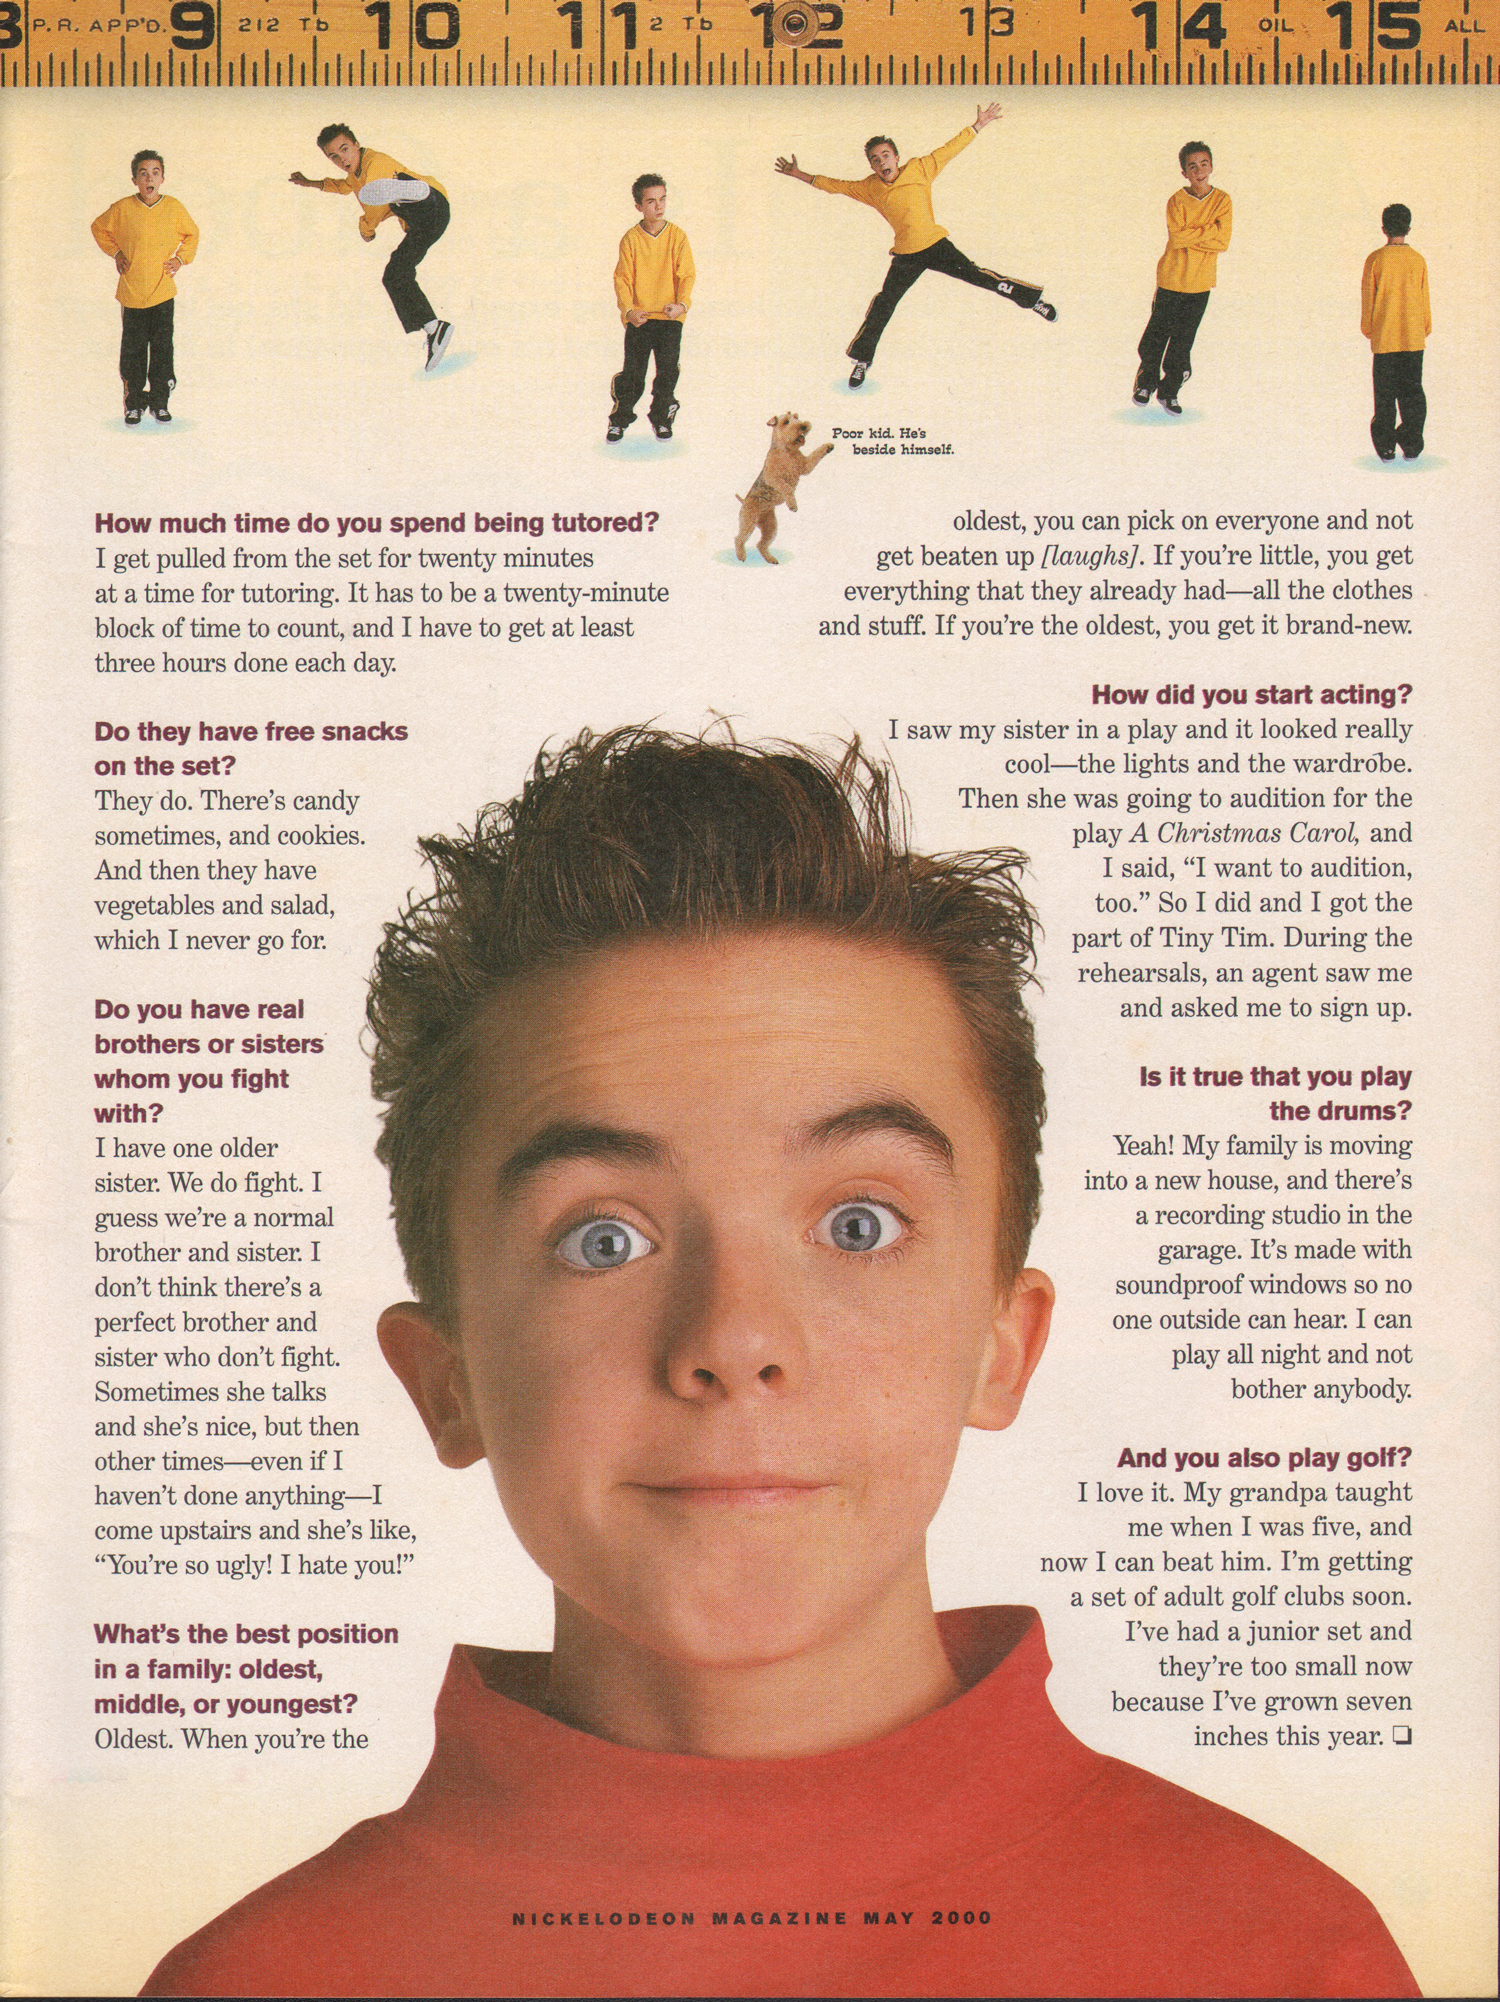 Frankie Muniz feature and cover in 'Nickelodeon' magazine, May 2000